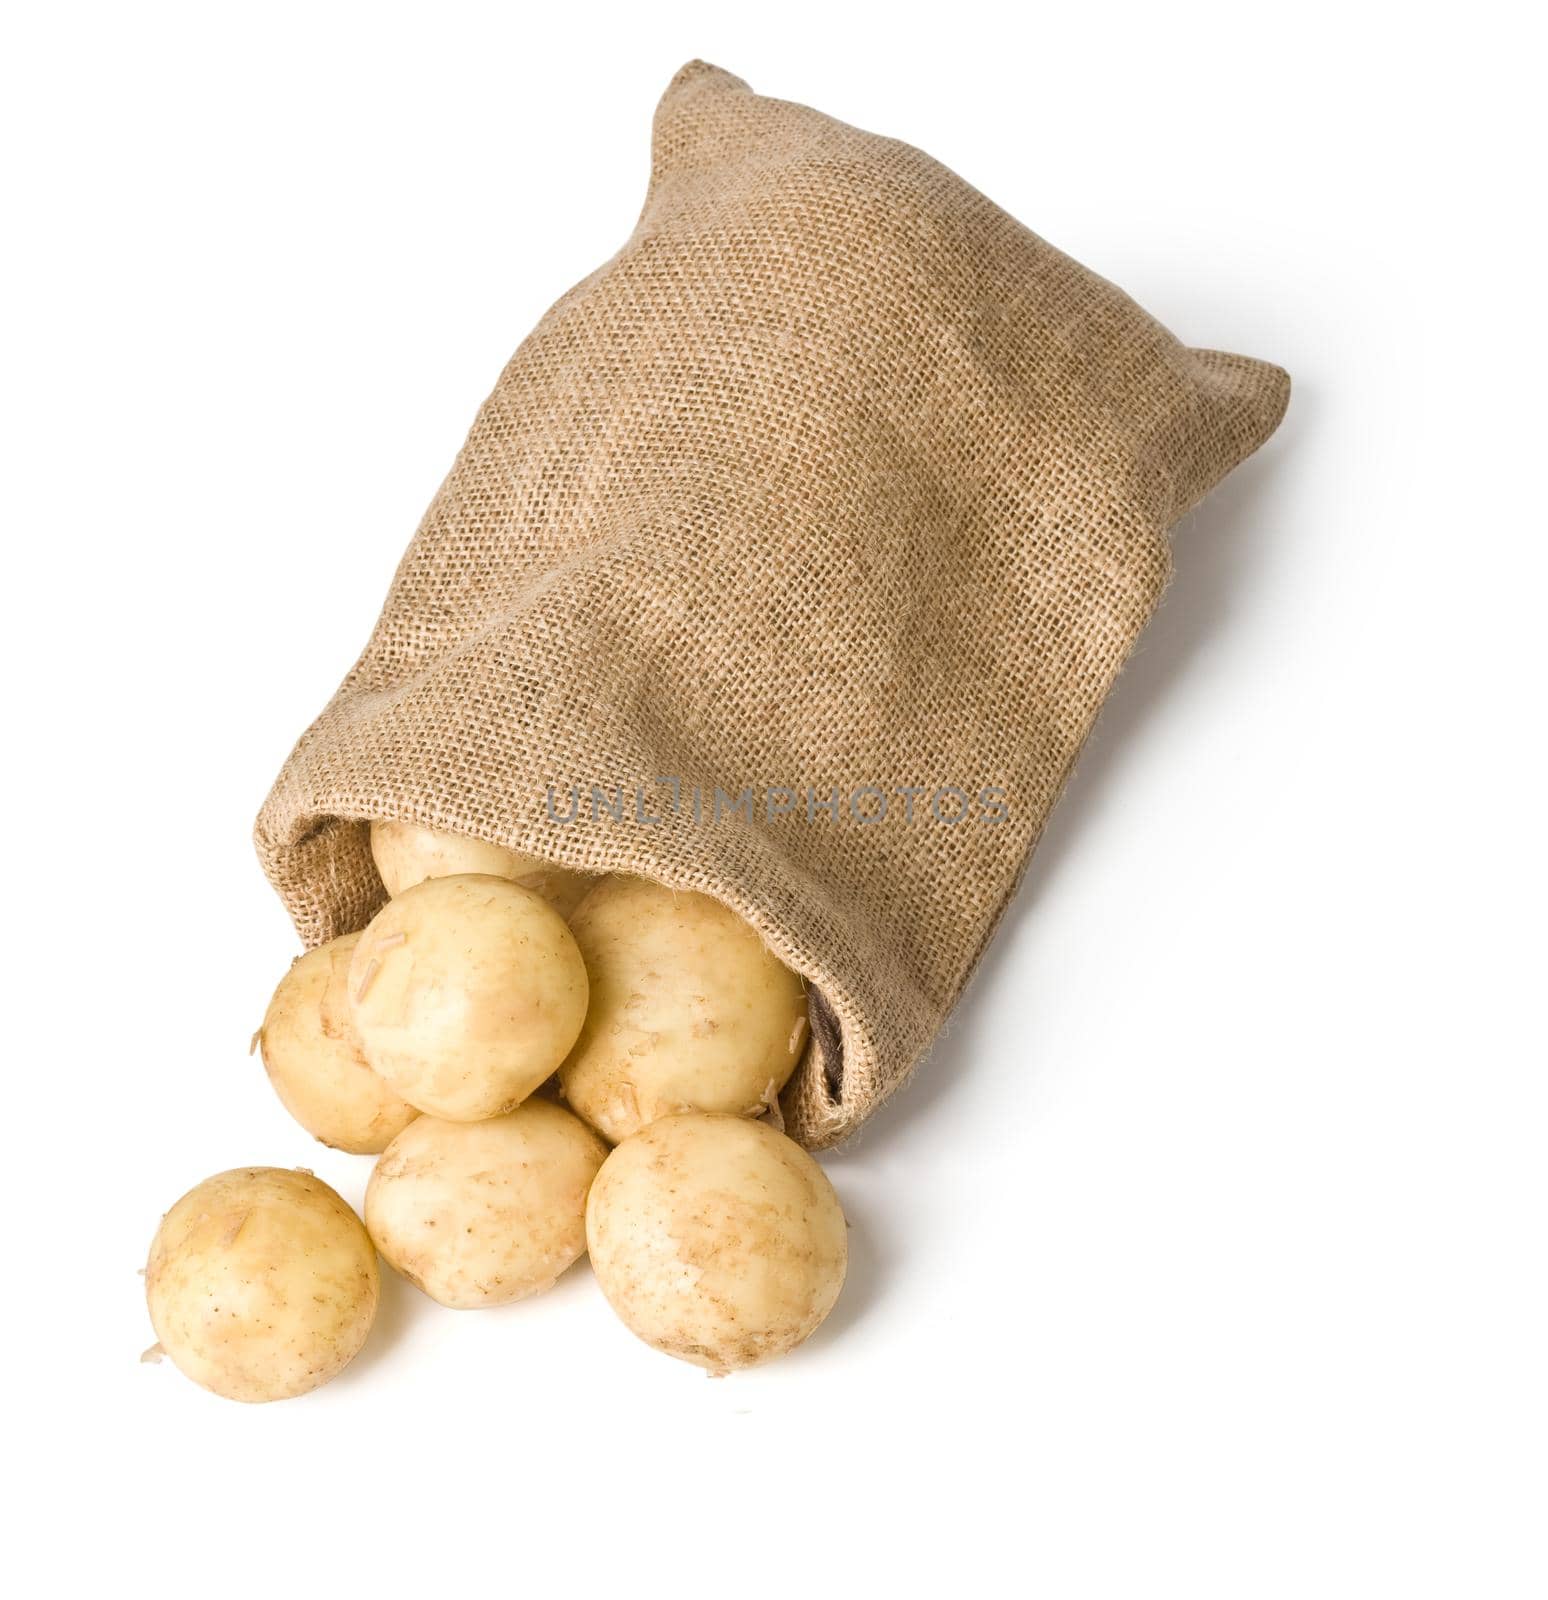 potatoes in burlap sack on white background with clipping path